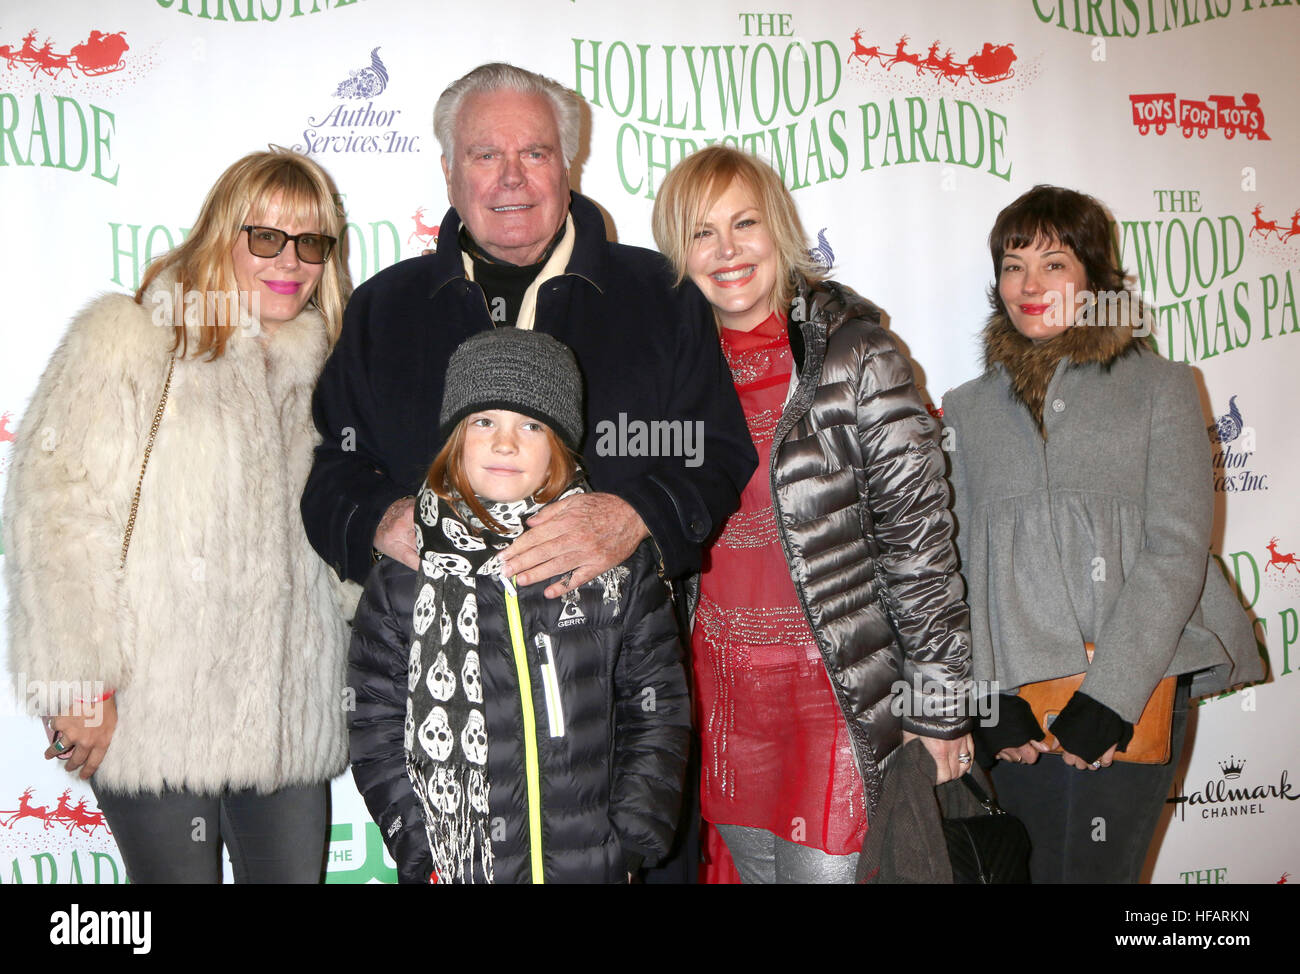 85th Annual Hollywood Christmas Parade on Hollywood Boulevard  Featuring: Courtney Brooke Wagner, Robert Wagner, Riley Wagner-Lewis, Katie Wagner, Natasha Gregson Wagner Where: Los Angeles, California, United States When: 27 Nov 2016 Stock Photo